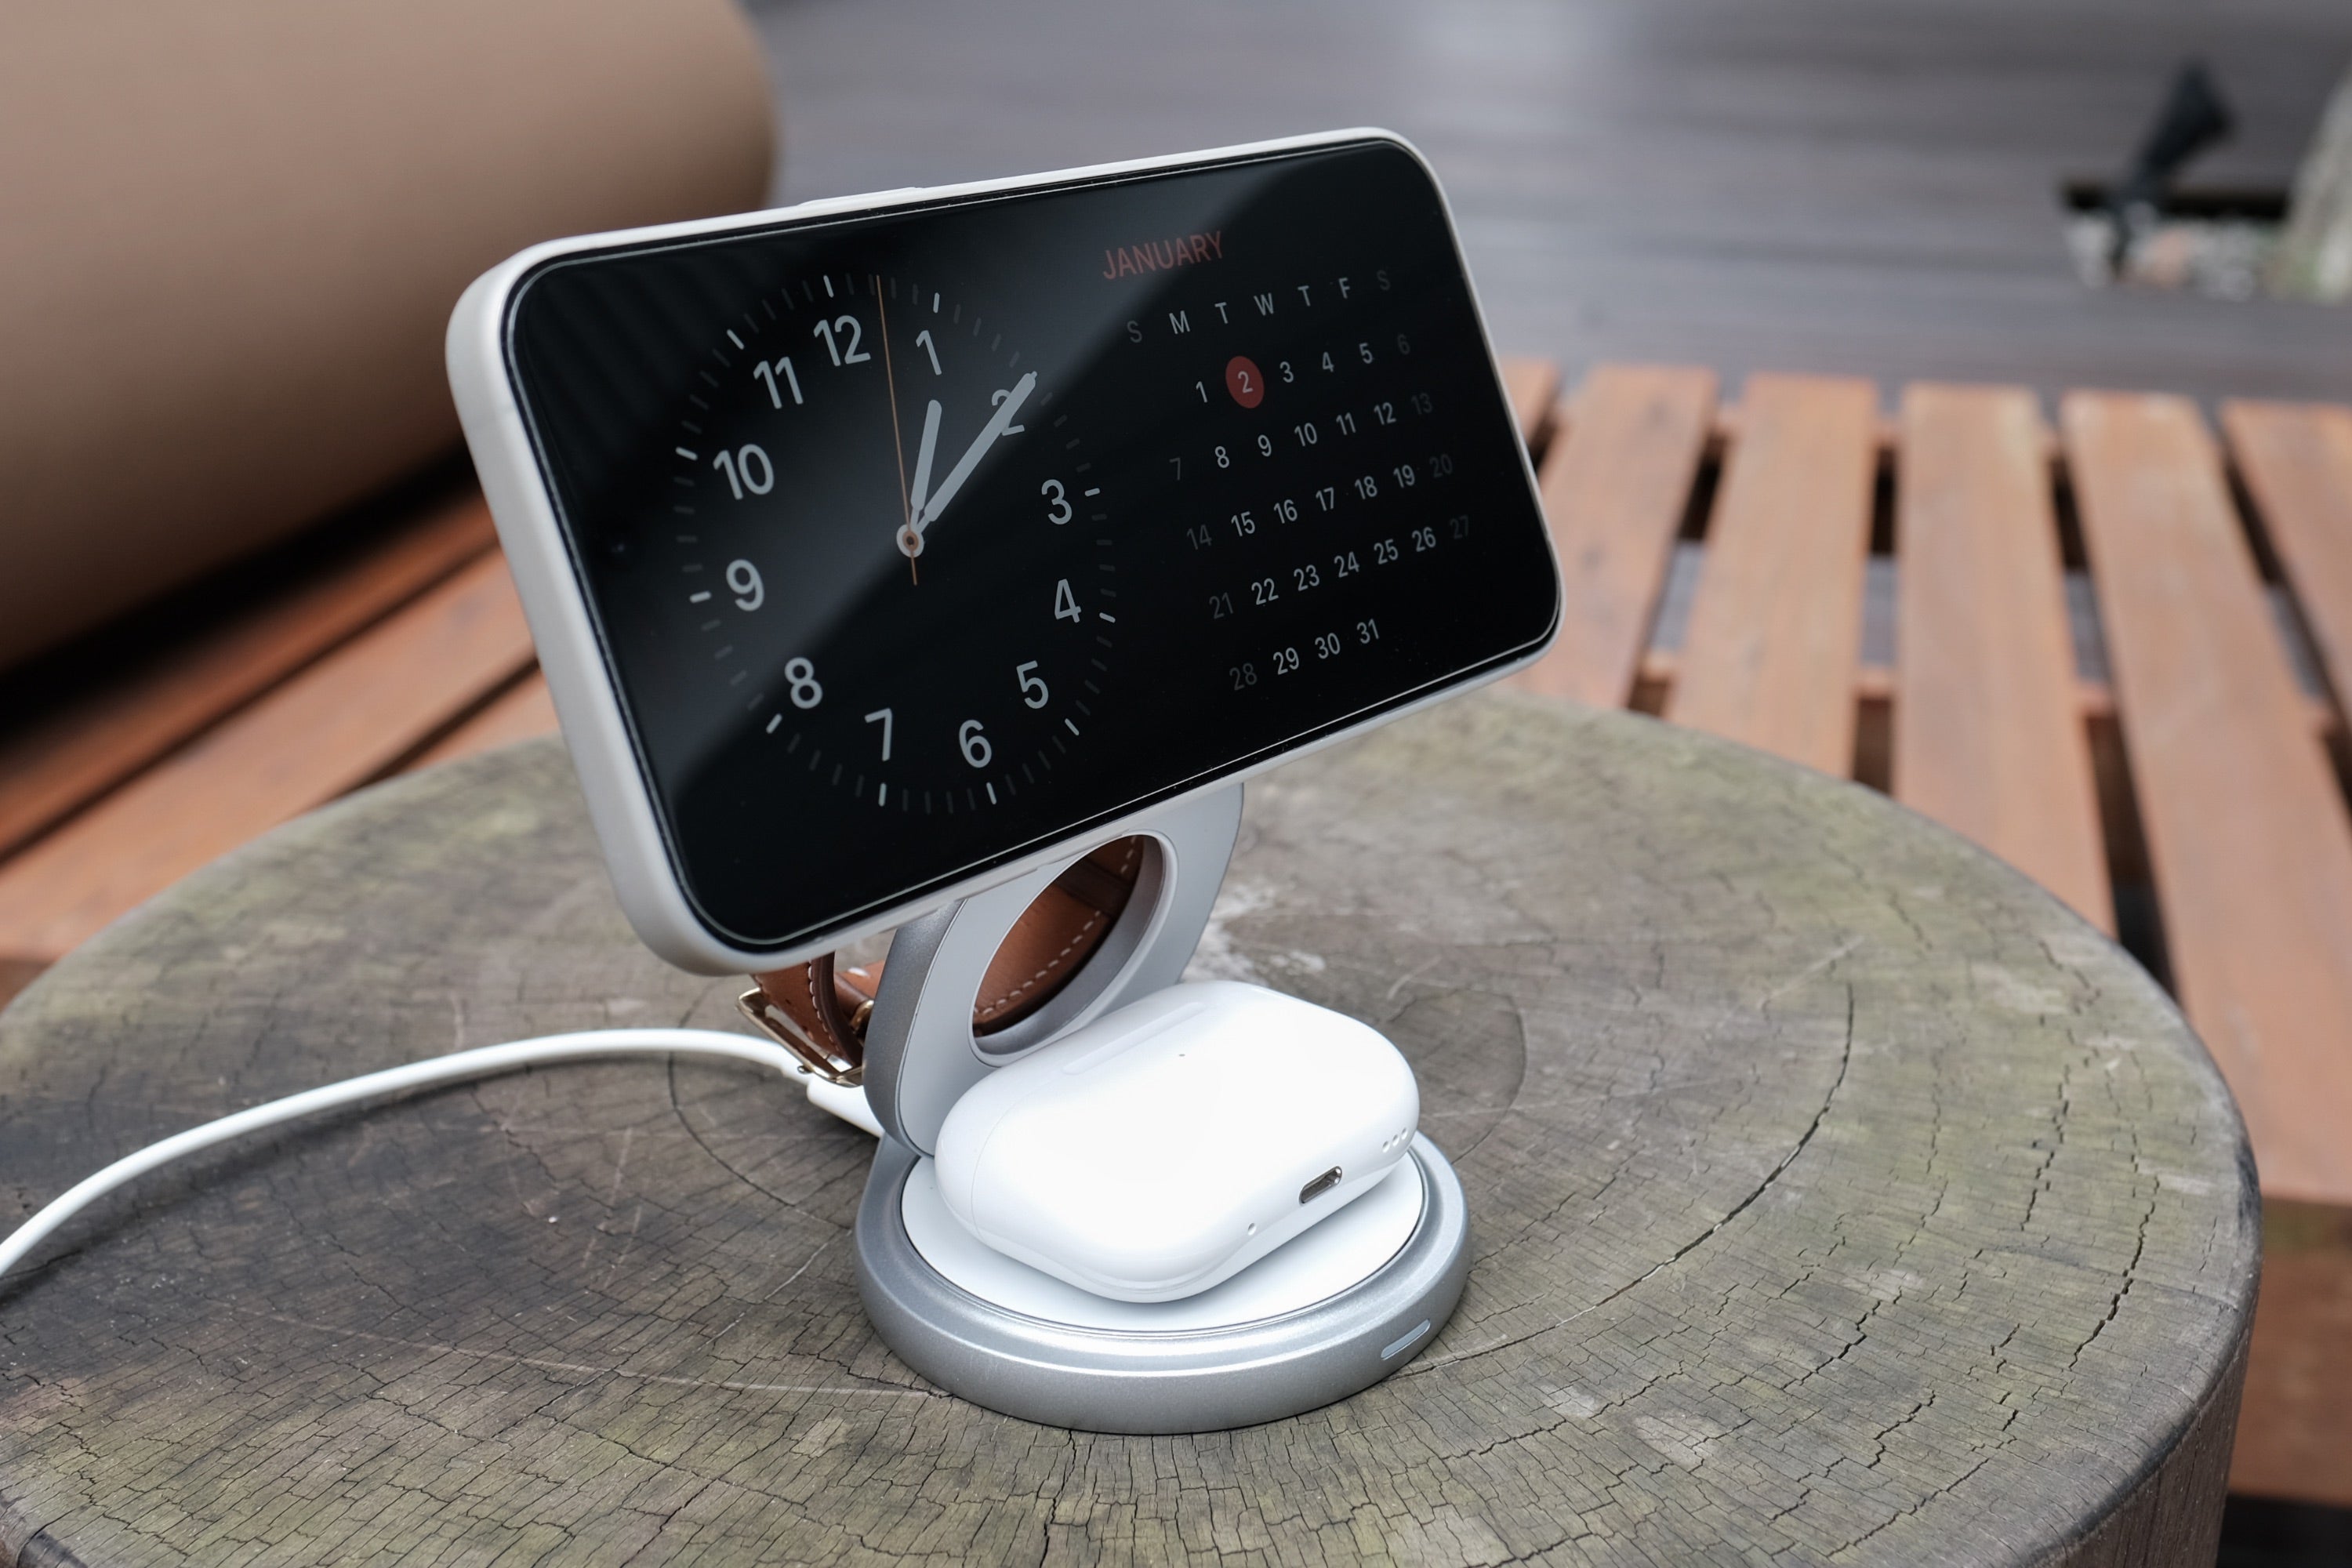 The Nexus 3-in-1 Wireless Charger - Landscape Mode